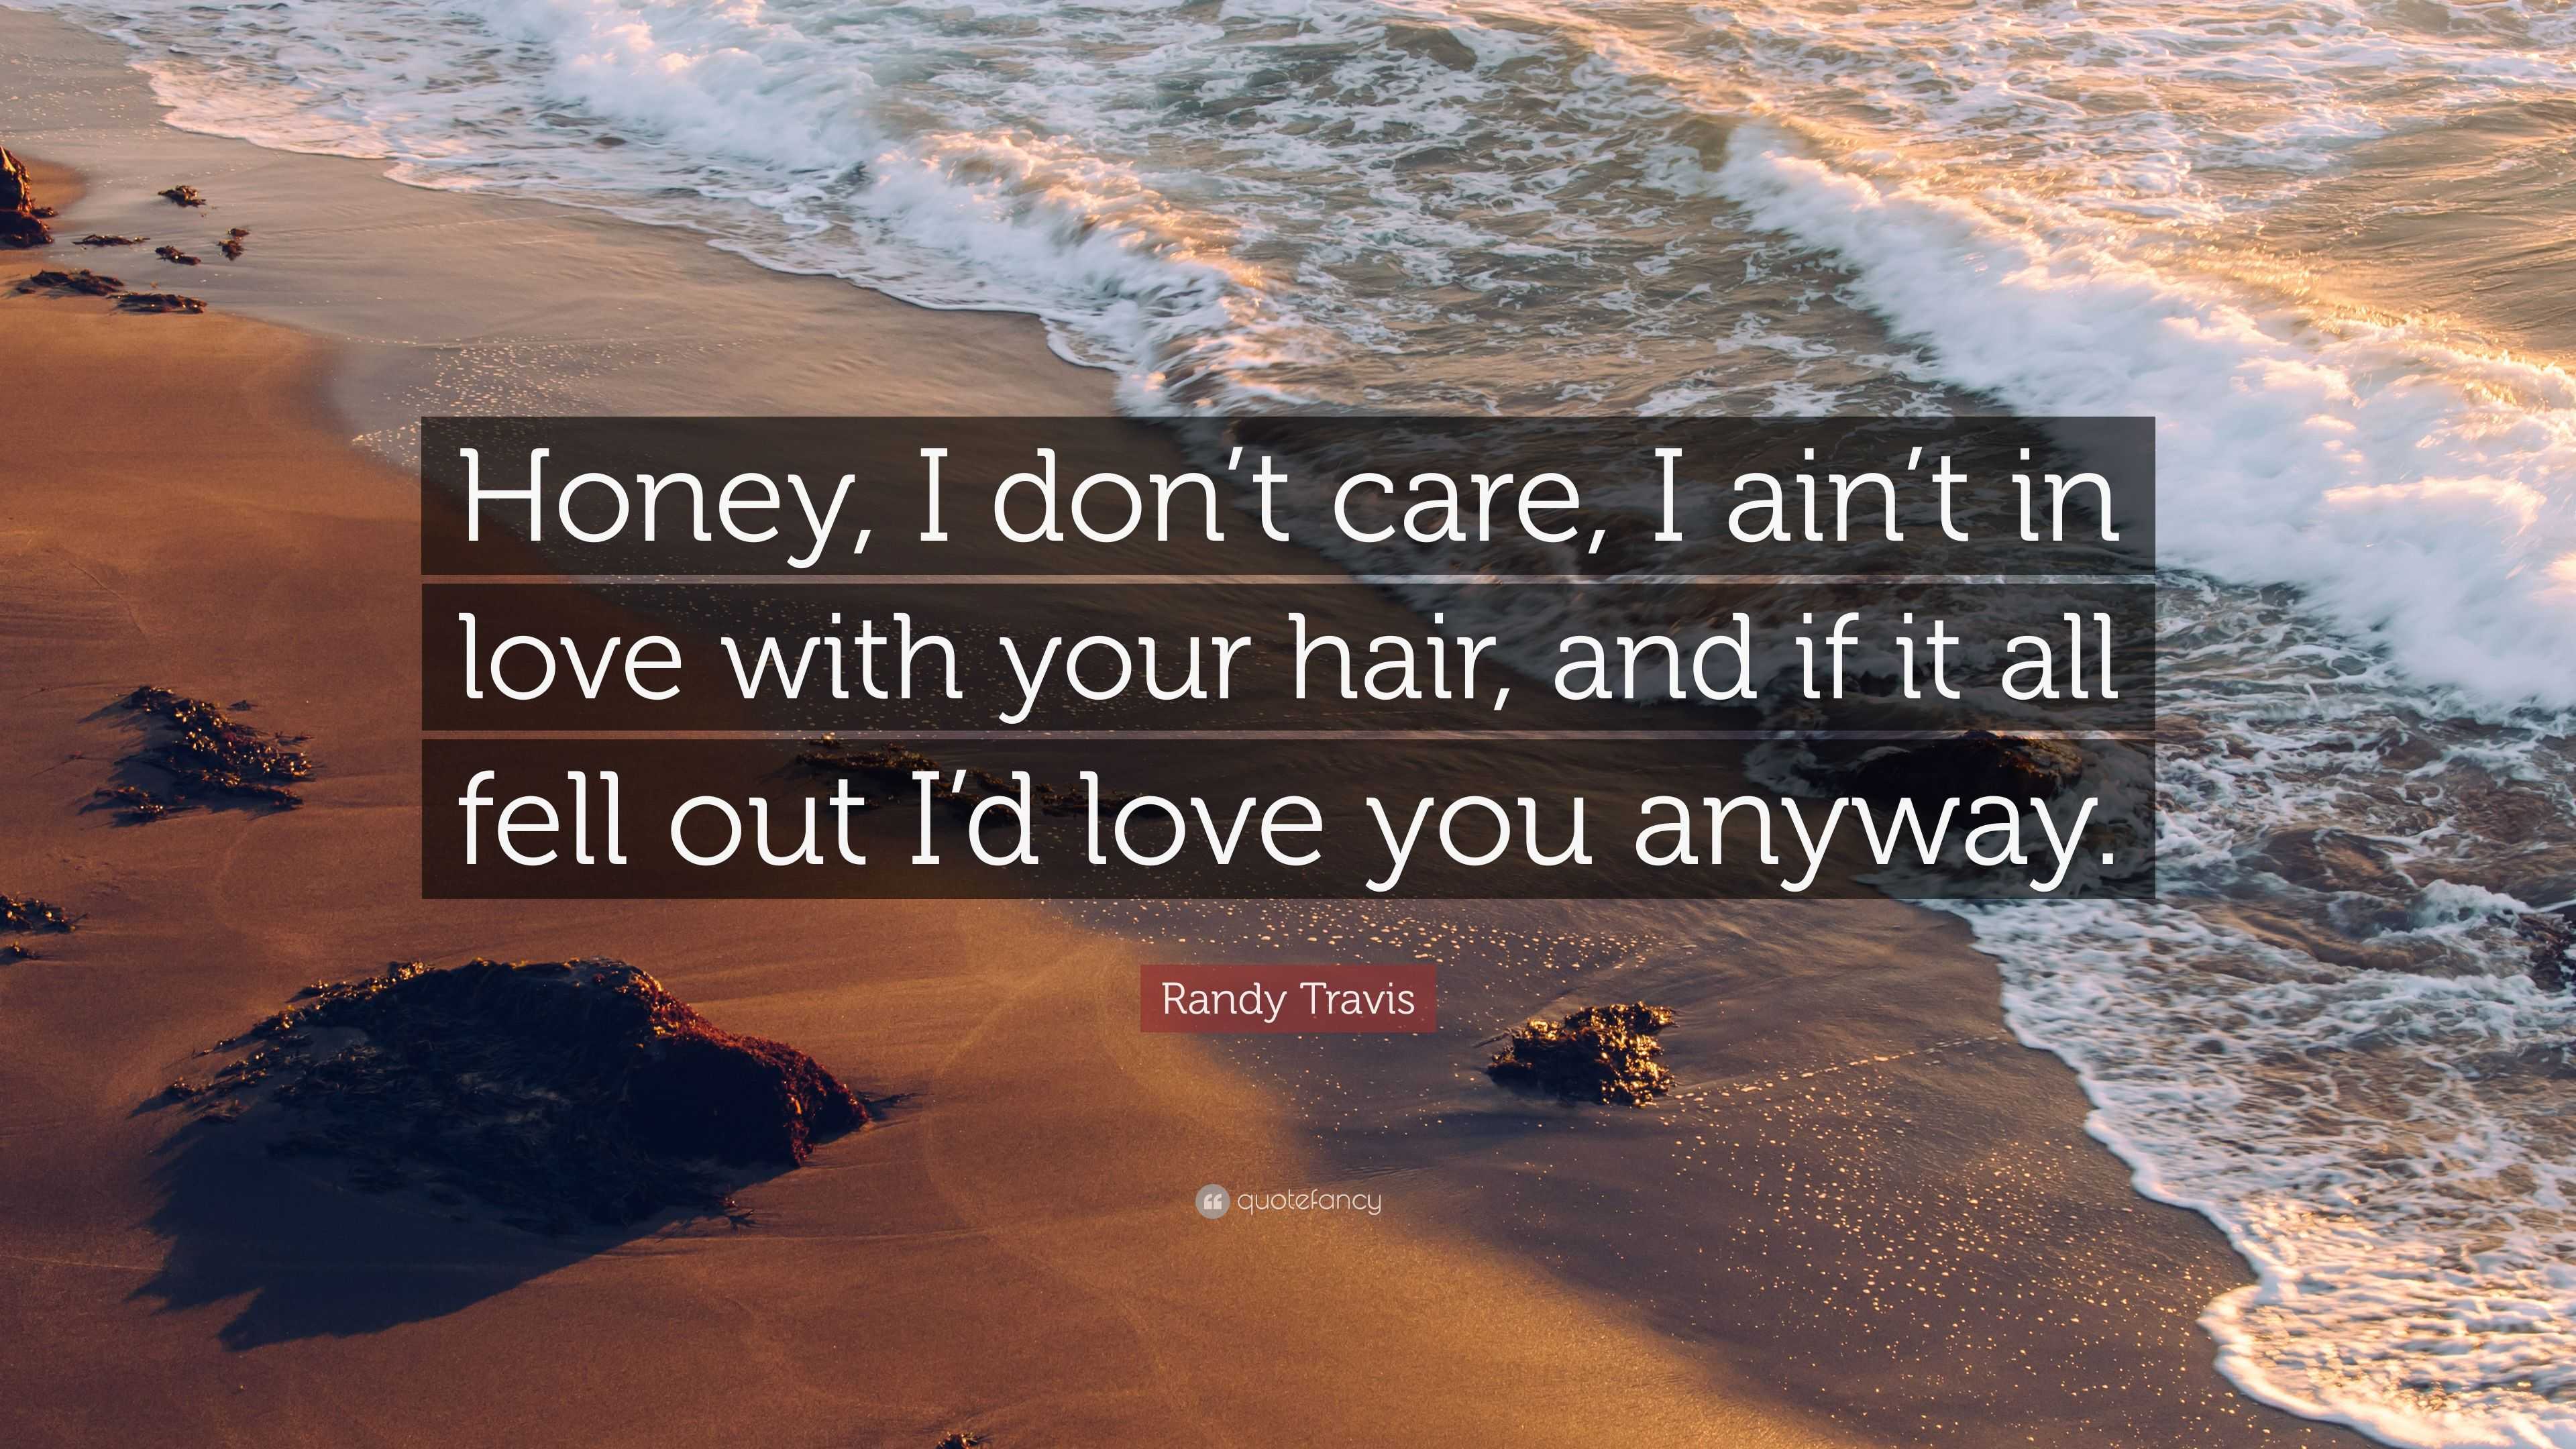 Randy Travis Quote: “Honey, I don't care, I ain't in love with your hair,